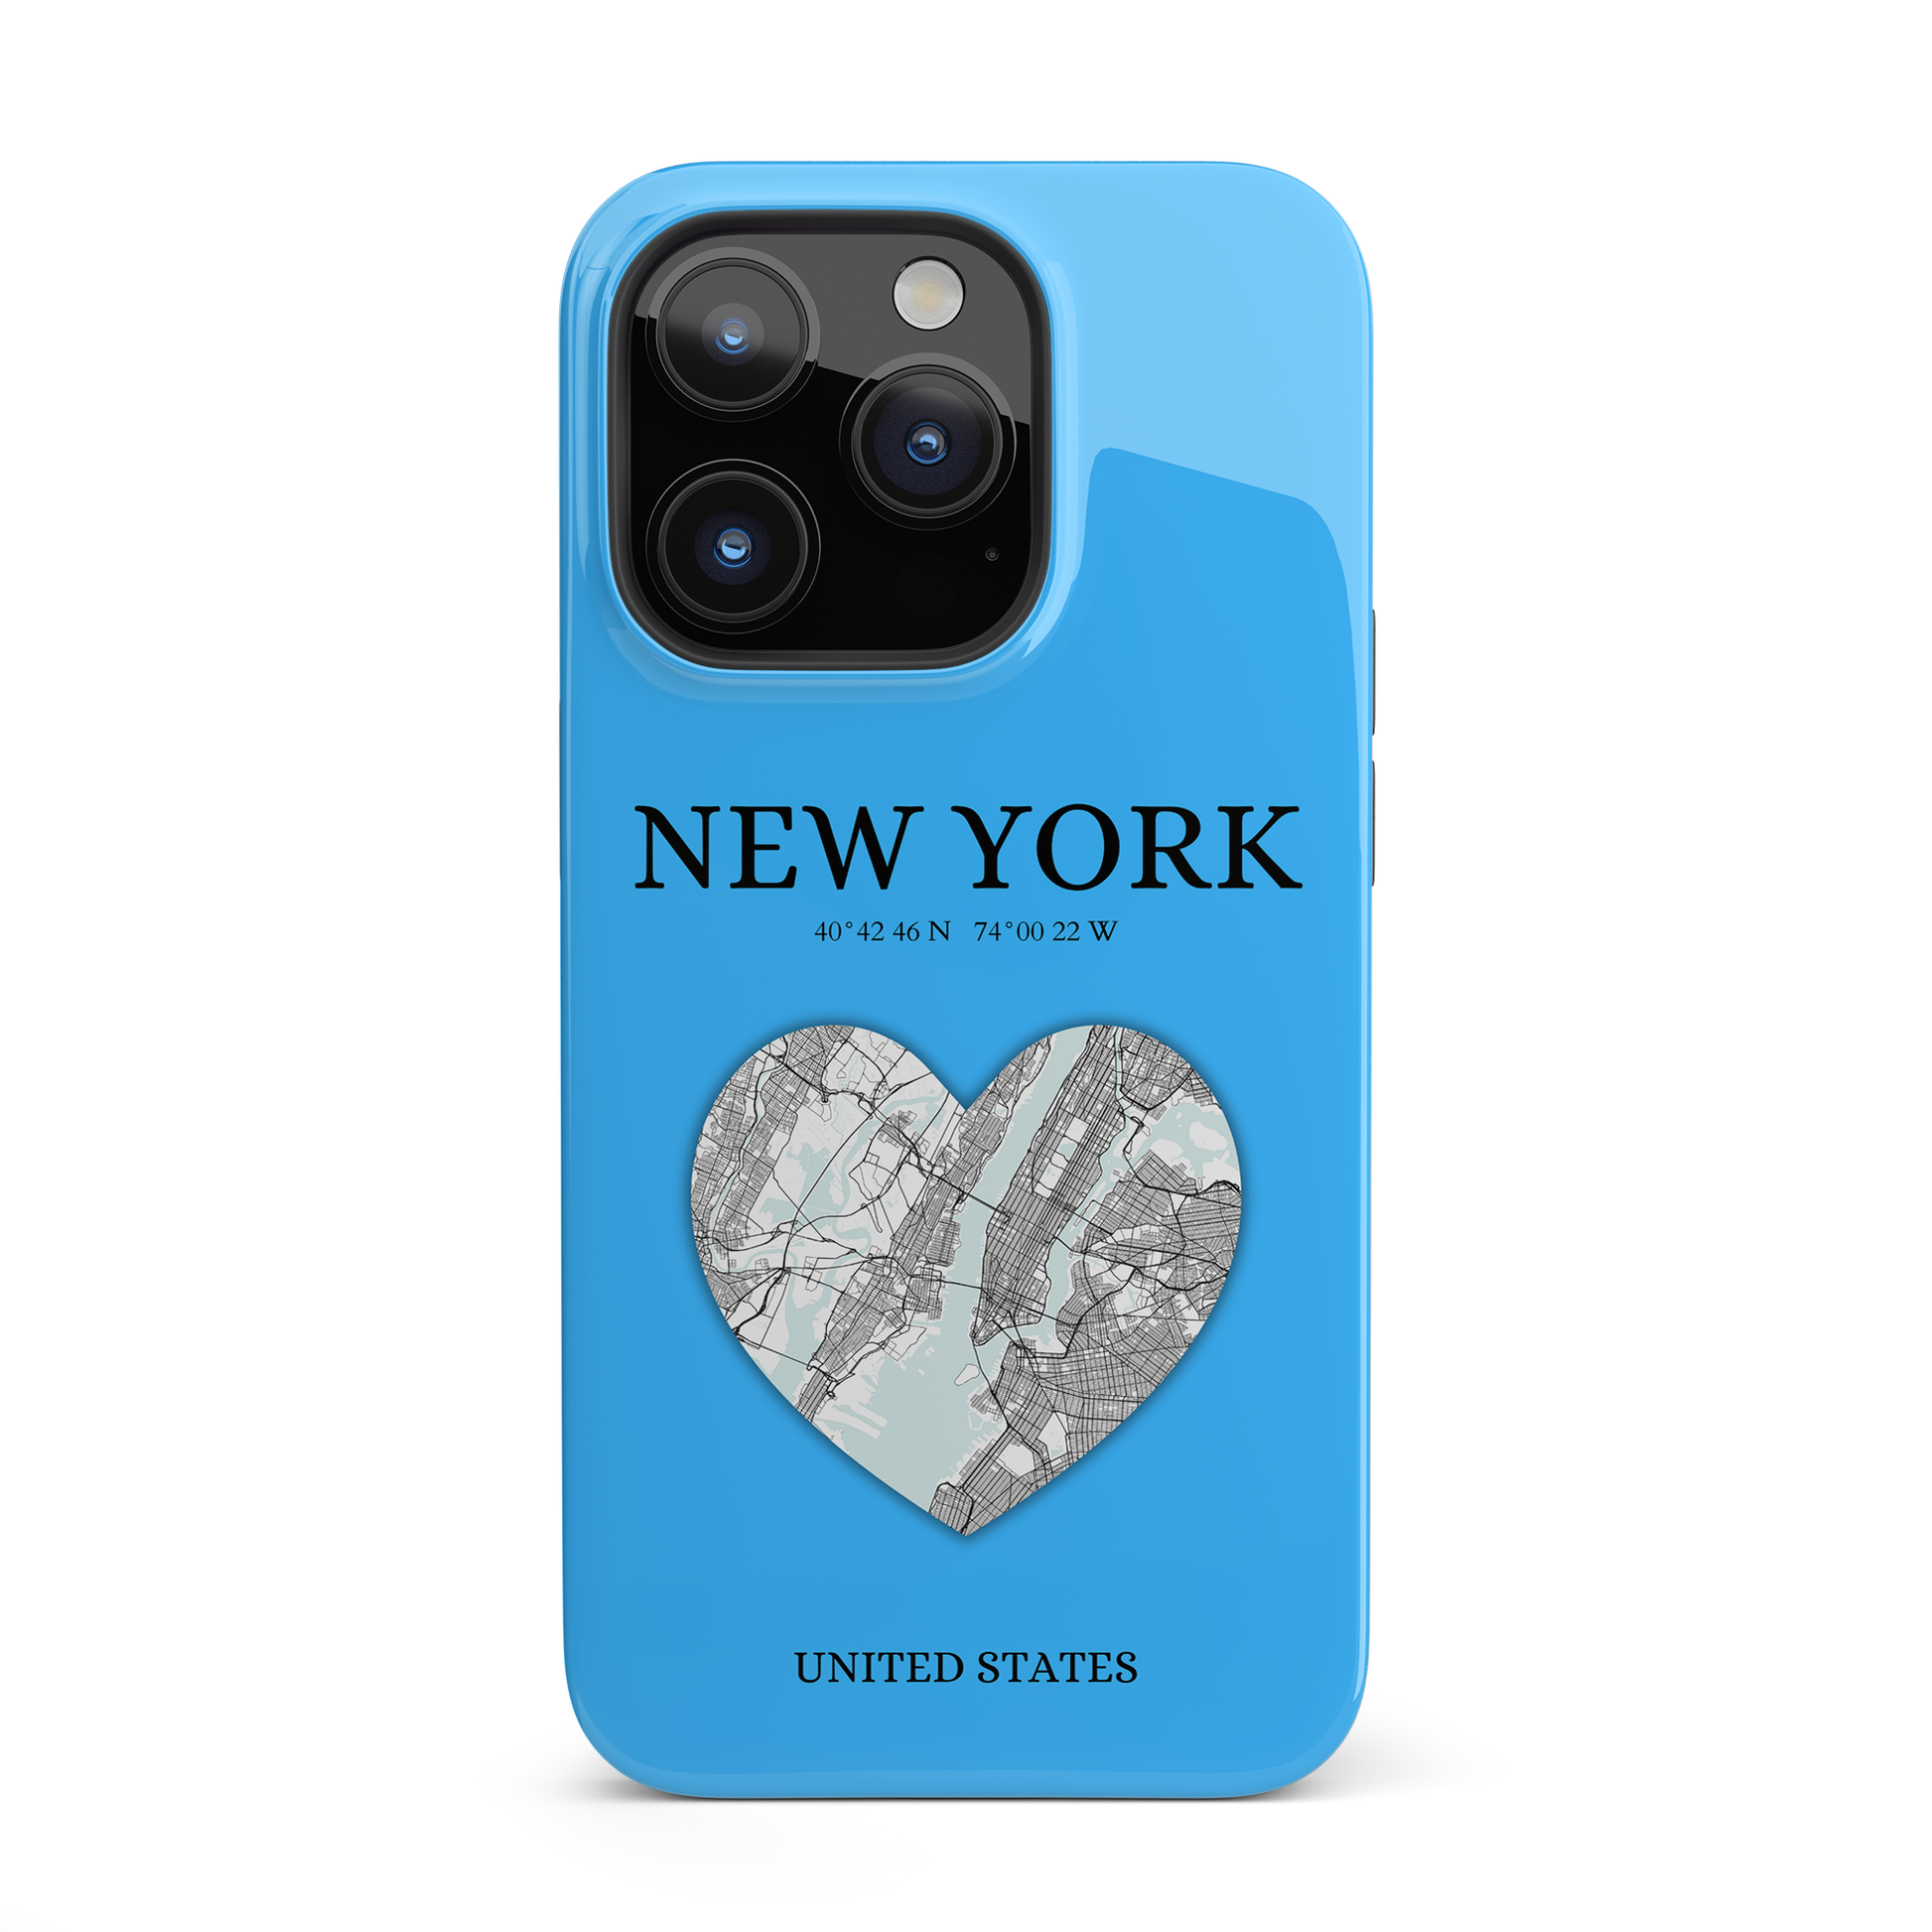 Secure your iPhone 11-15 with RIMA's durable case: Polycarbonate shell, rubber lining for shock absorption, and supports wireless charging-York Heartbeat - Sky Blue (iPhone Case 11-15)